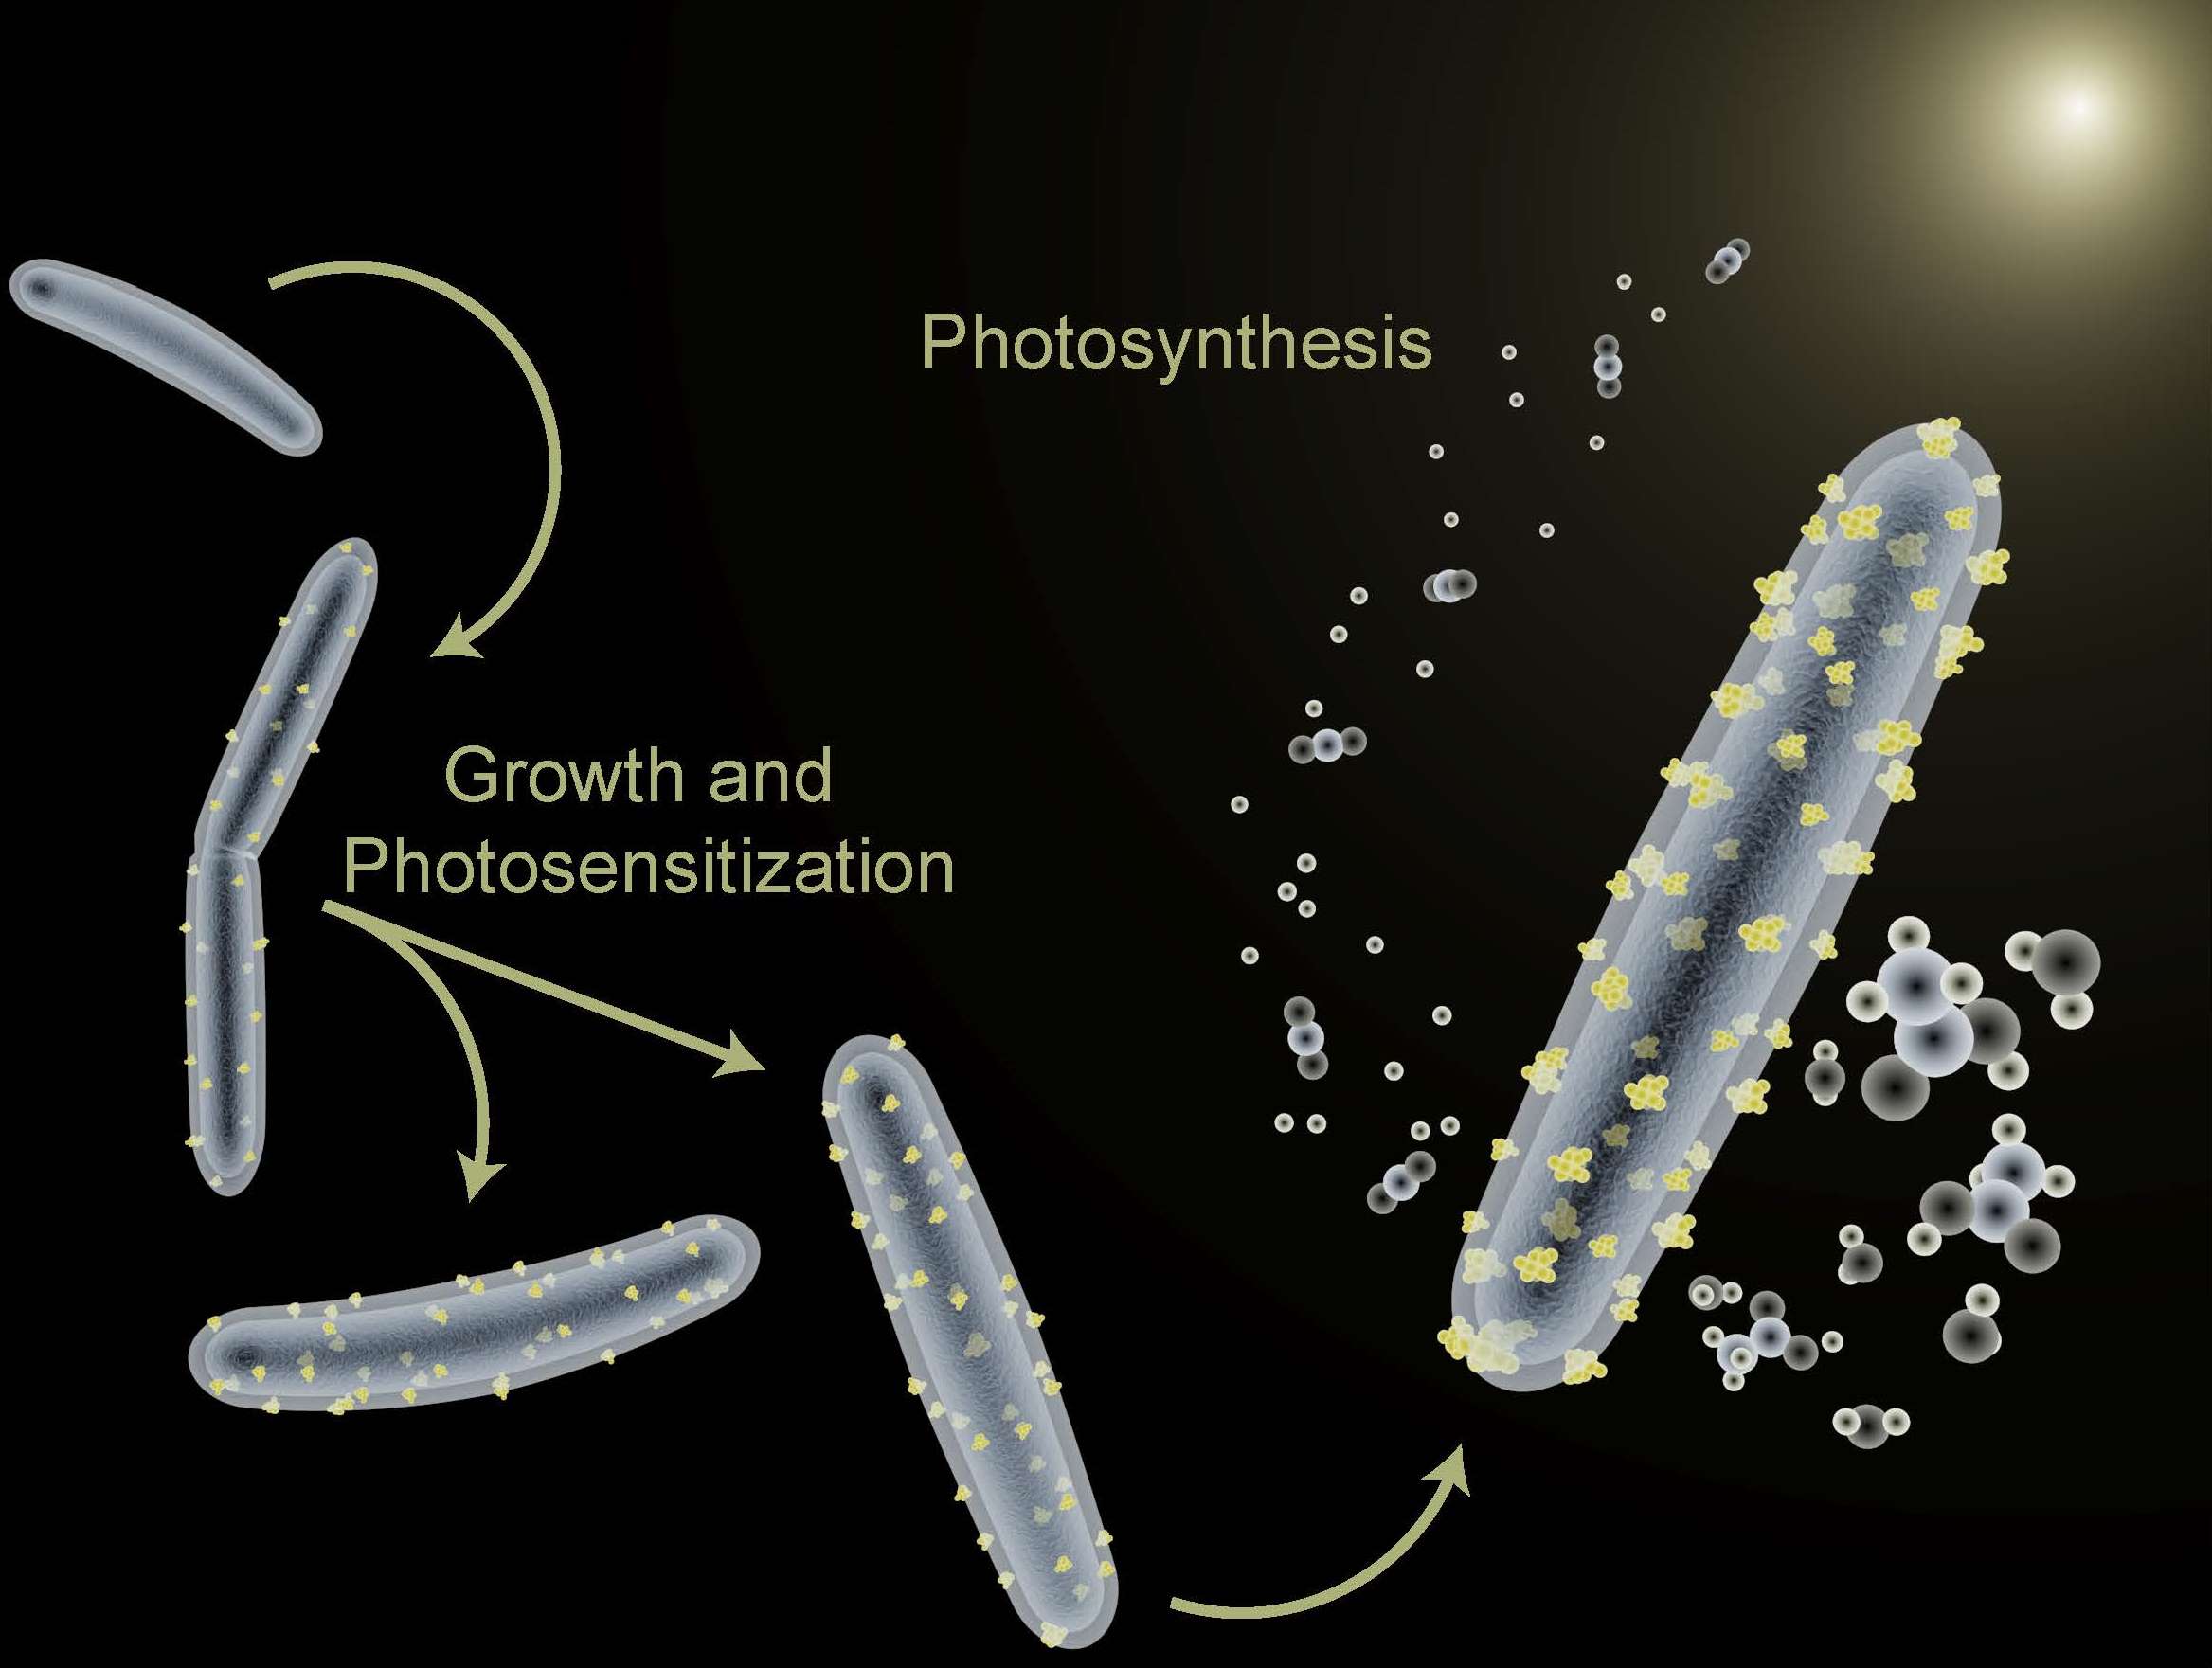 Image - In a 2016 study, Berkeley Lab scientists used the bacterium Moorella thermoacetica in a hybrid artificial photosynthesis system for converting sunlight into valuable chemical products. (Credit: Berkeley Lab)